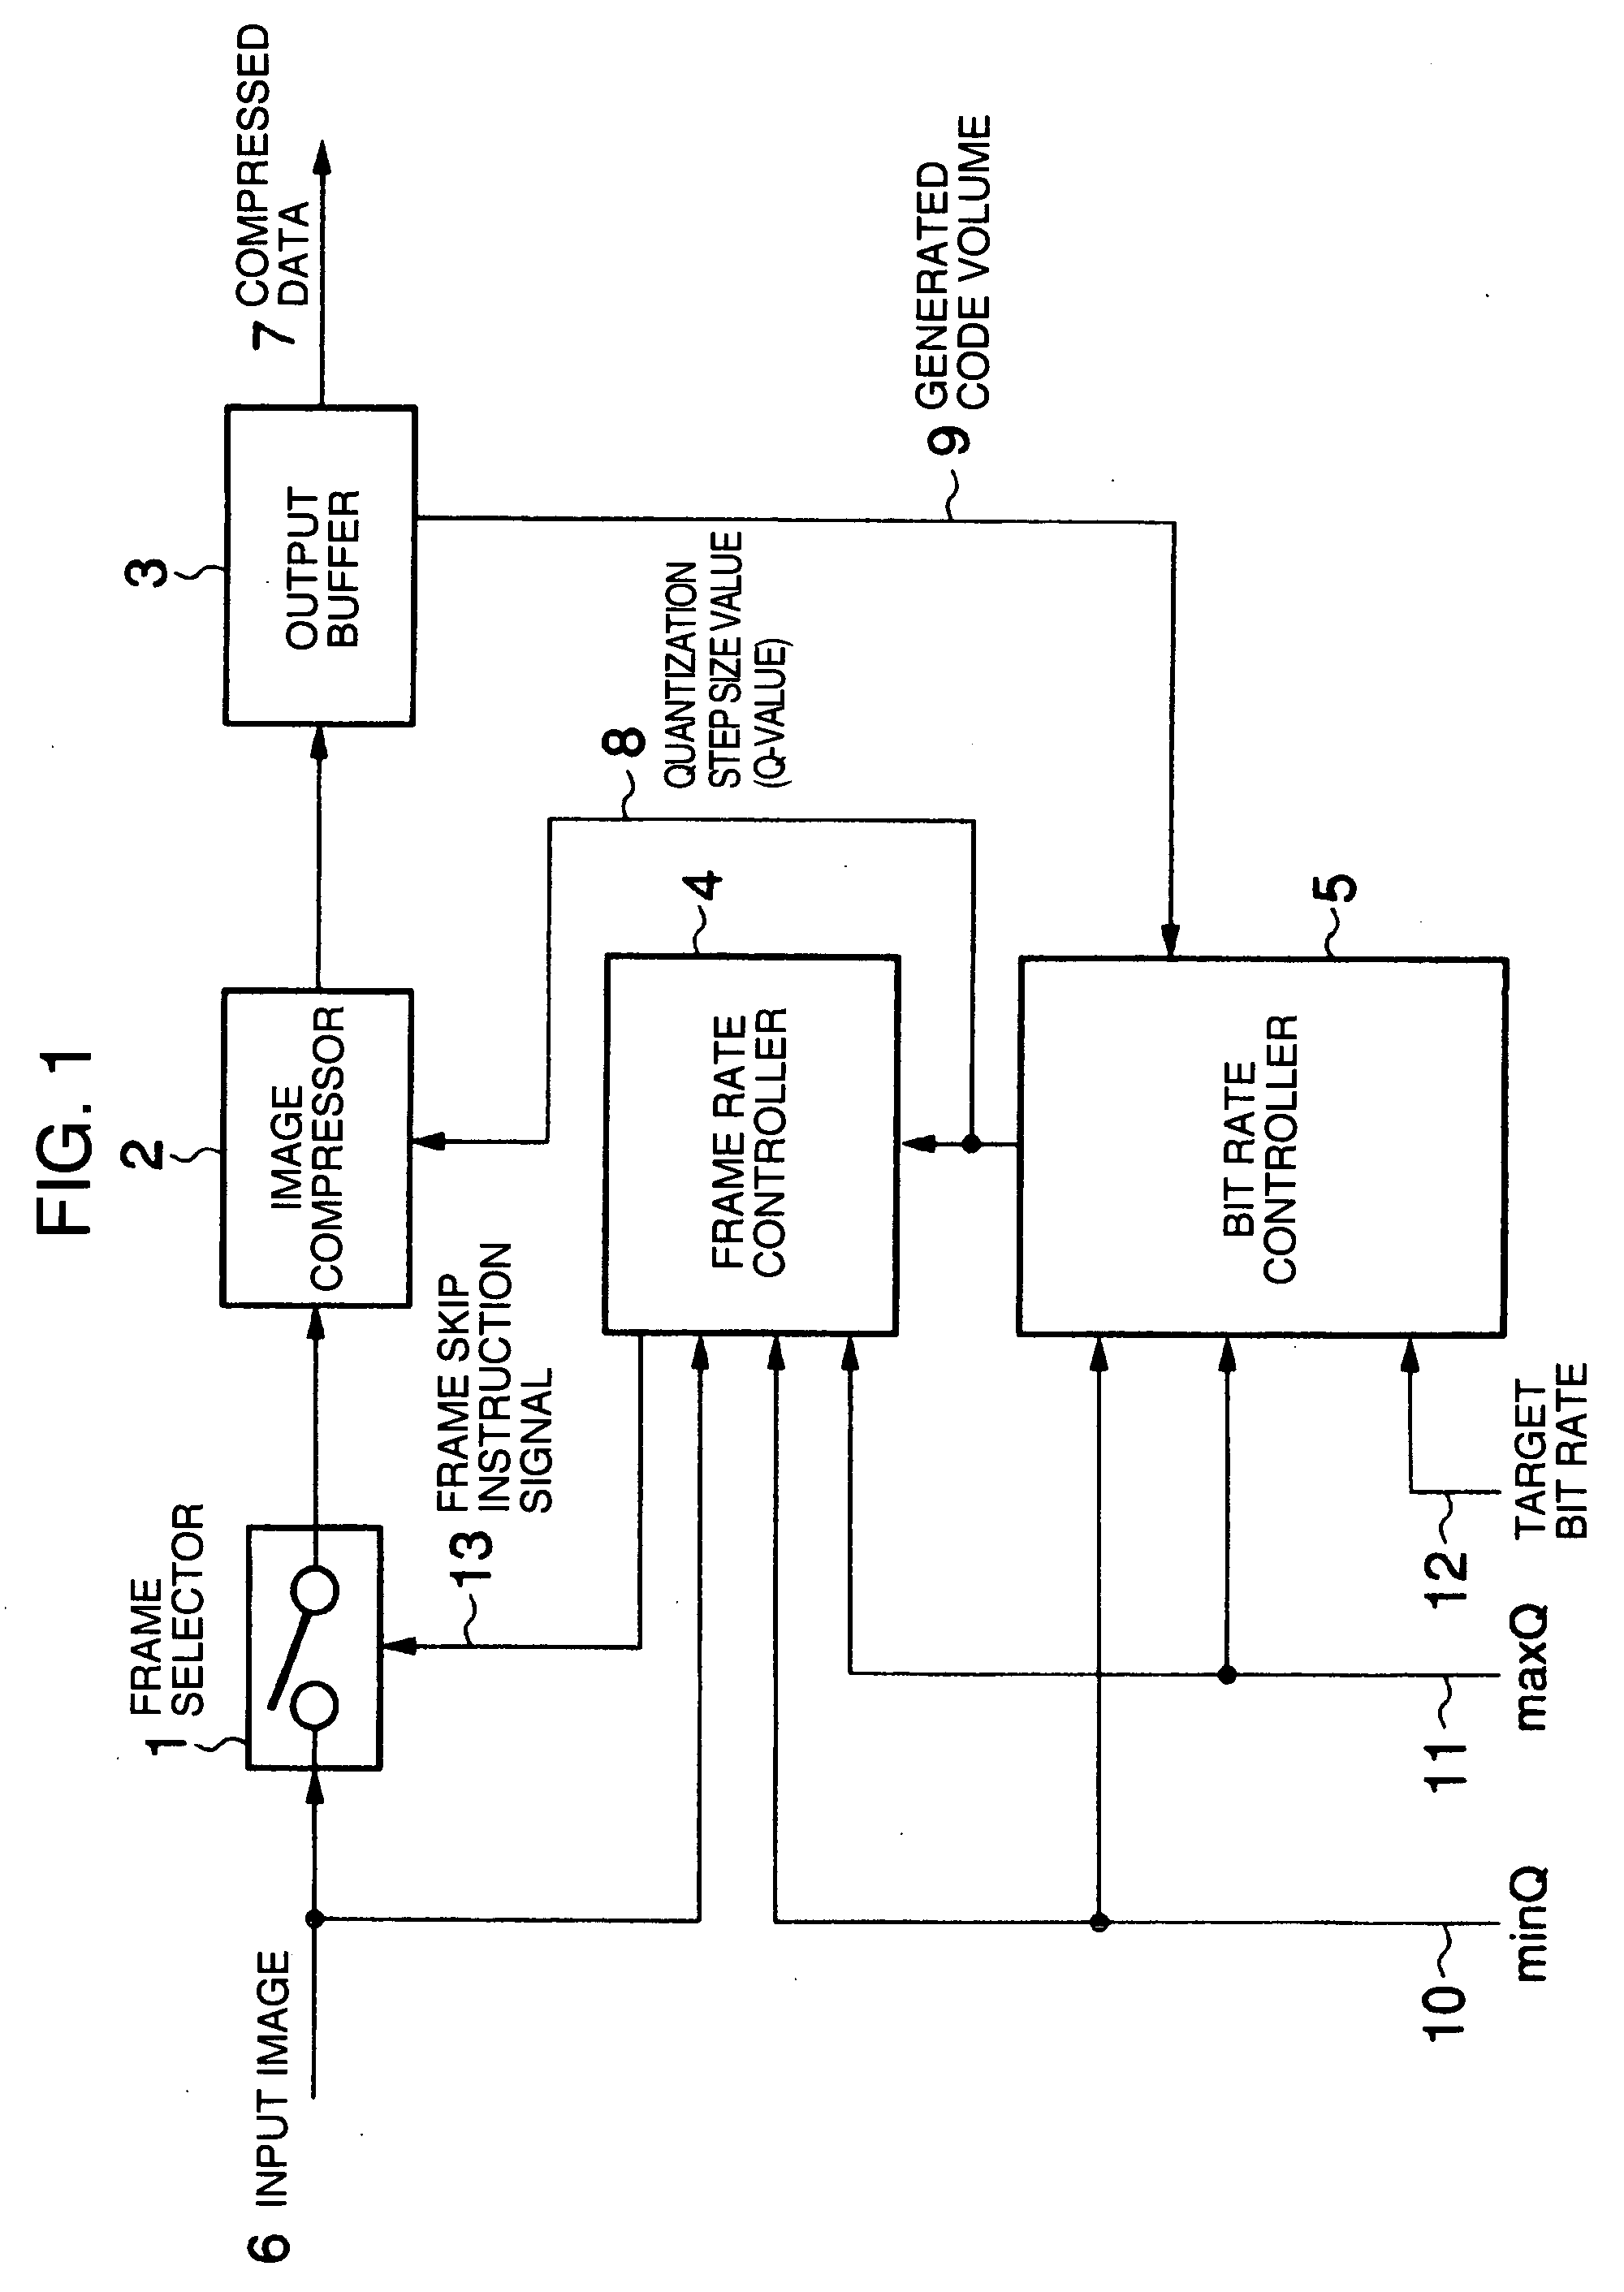 Method and apparatus for compressing image data